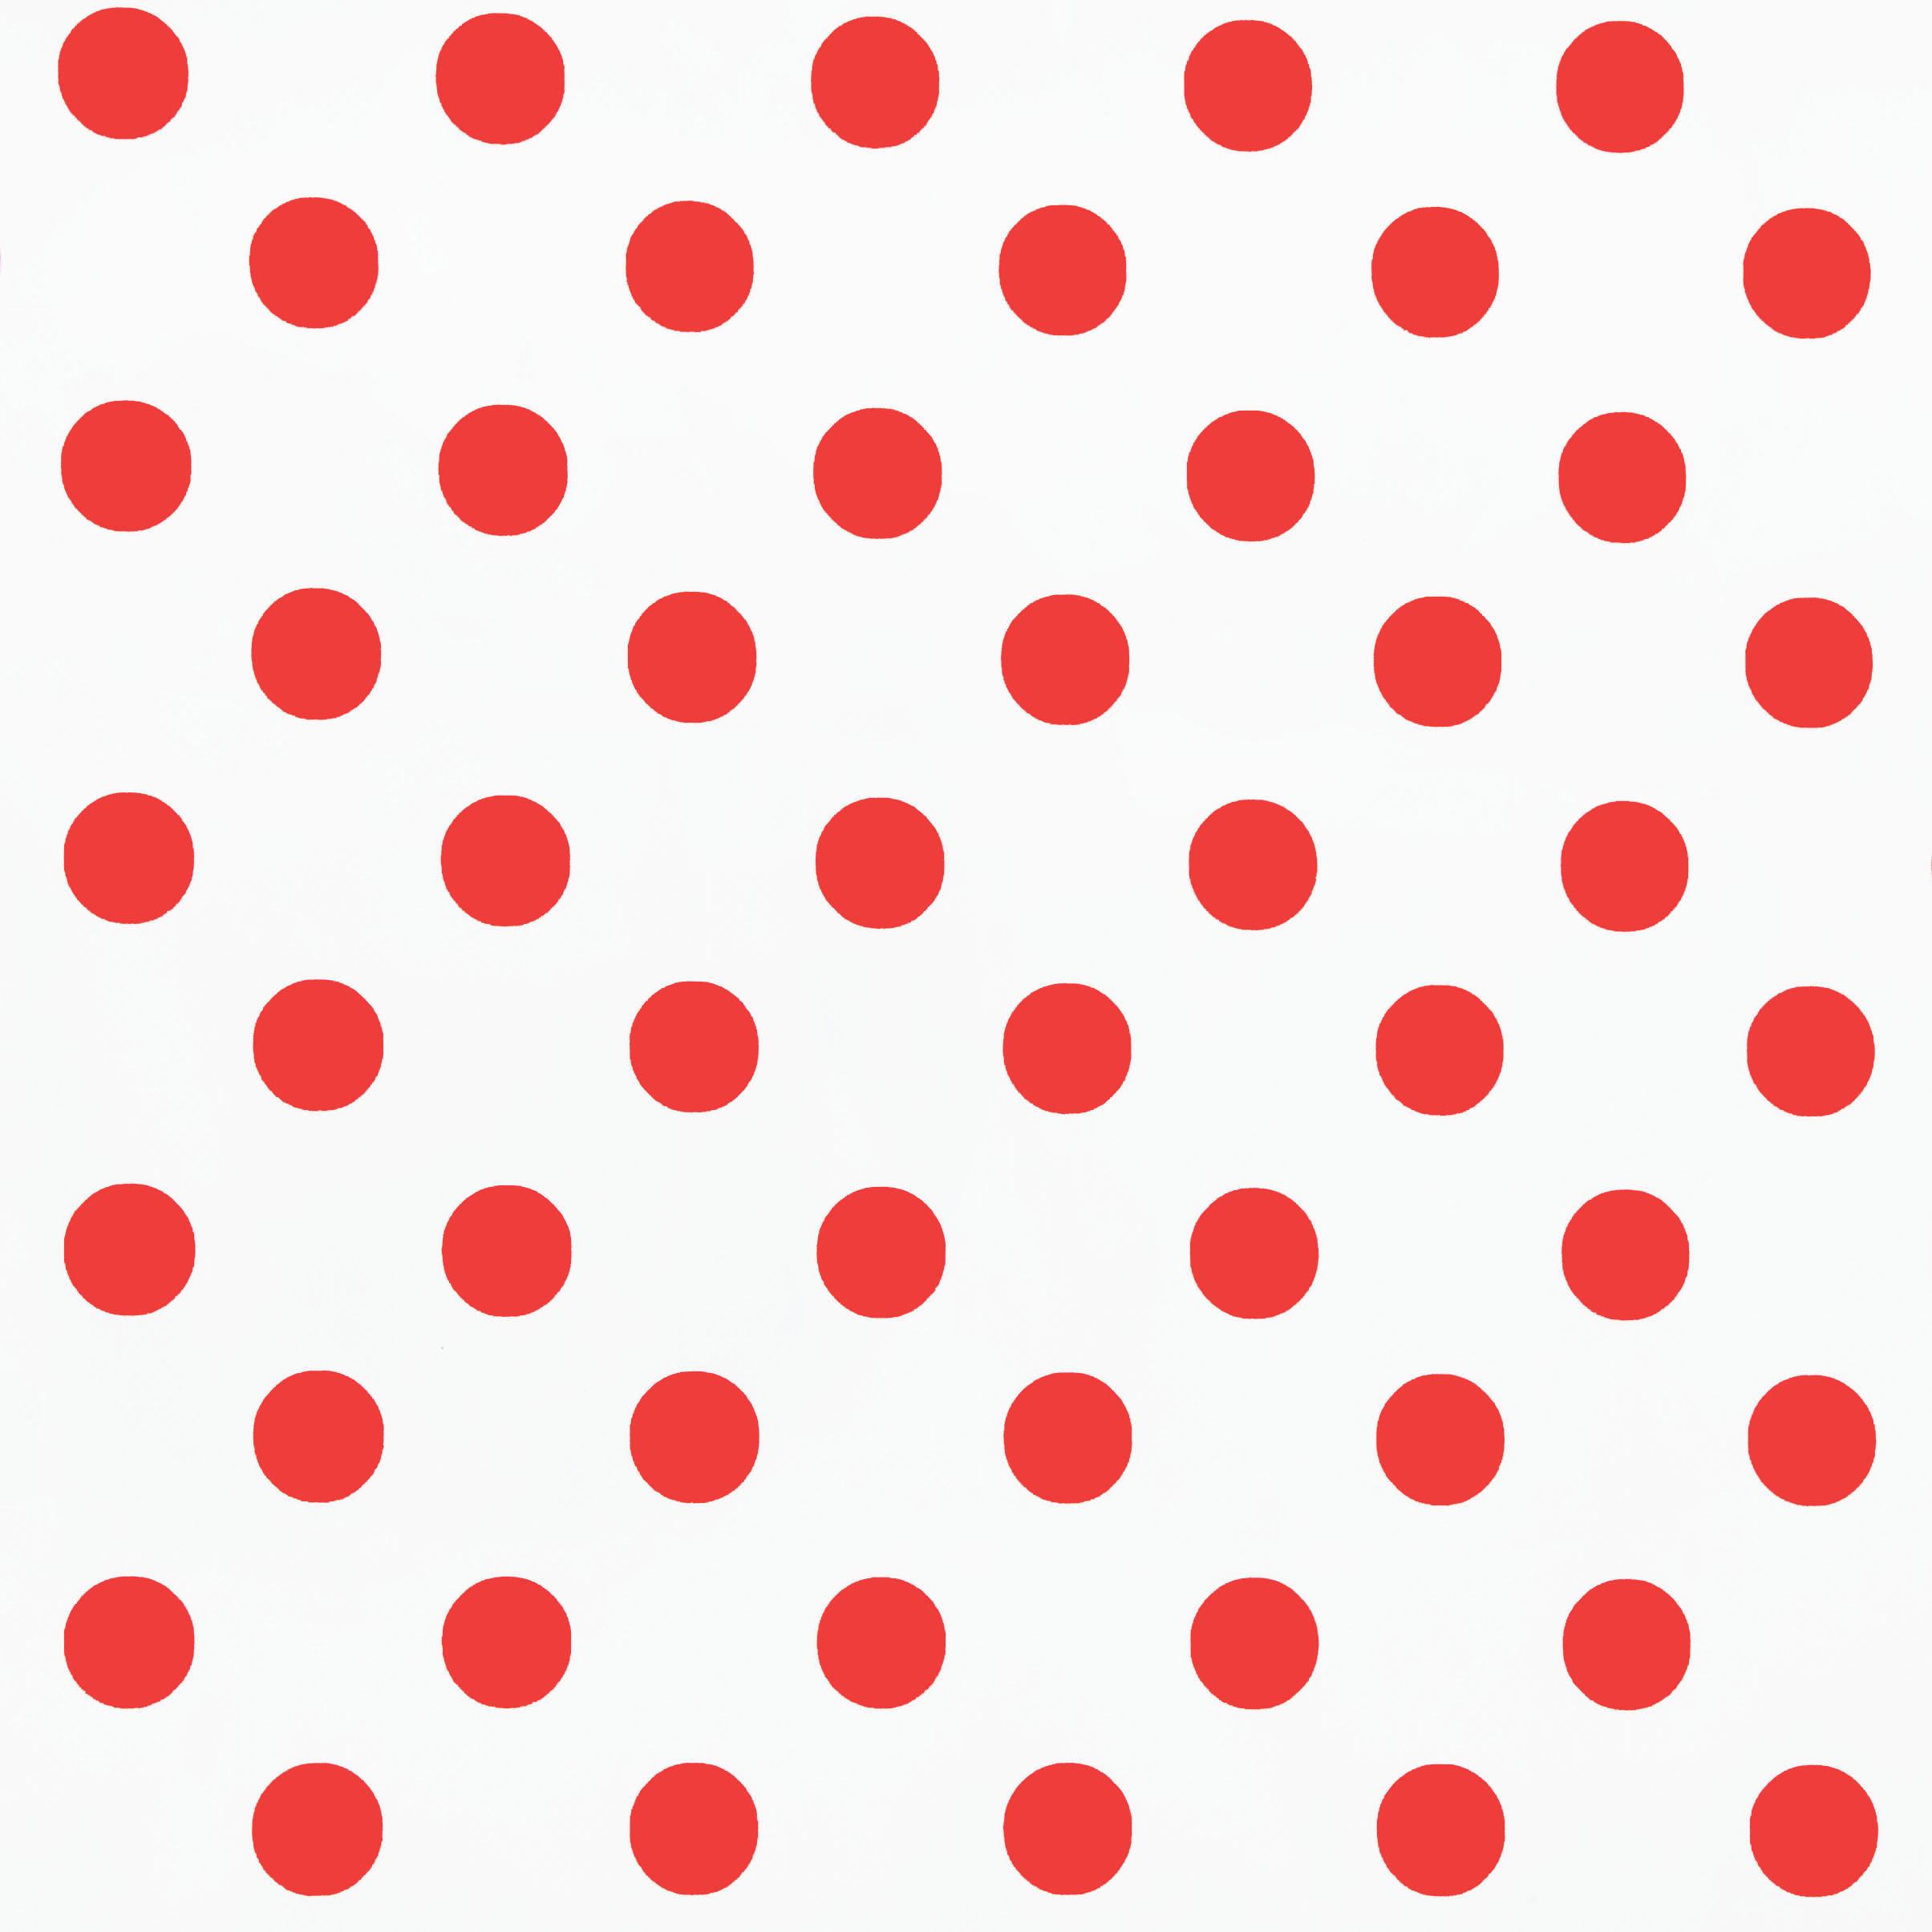 Yellow Background With White Polka Dots - HD Photos Gallery